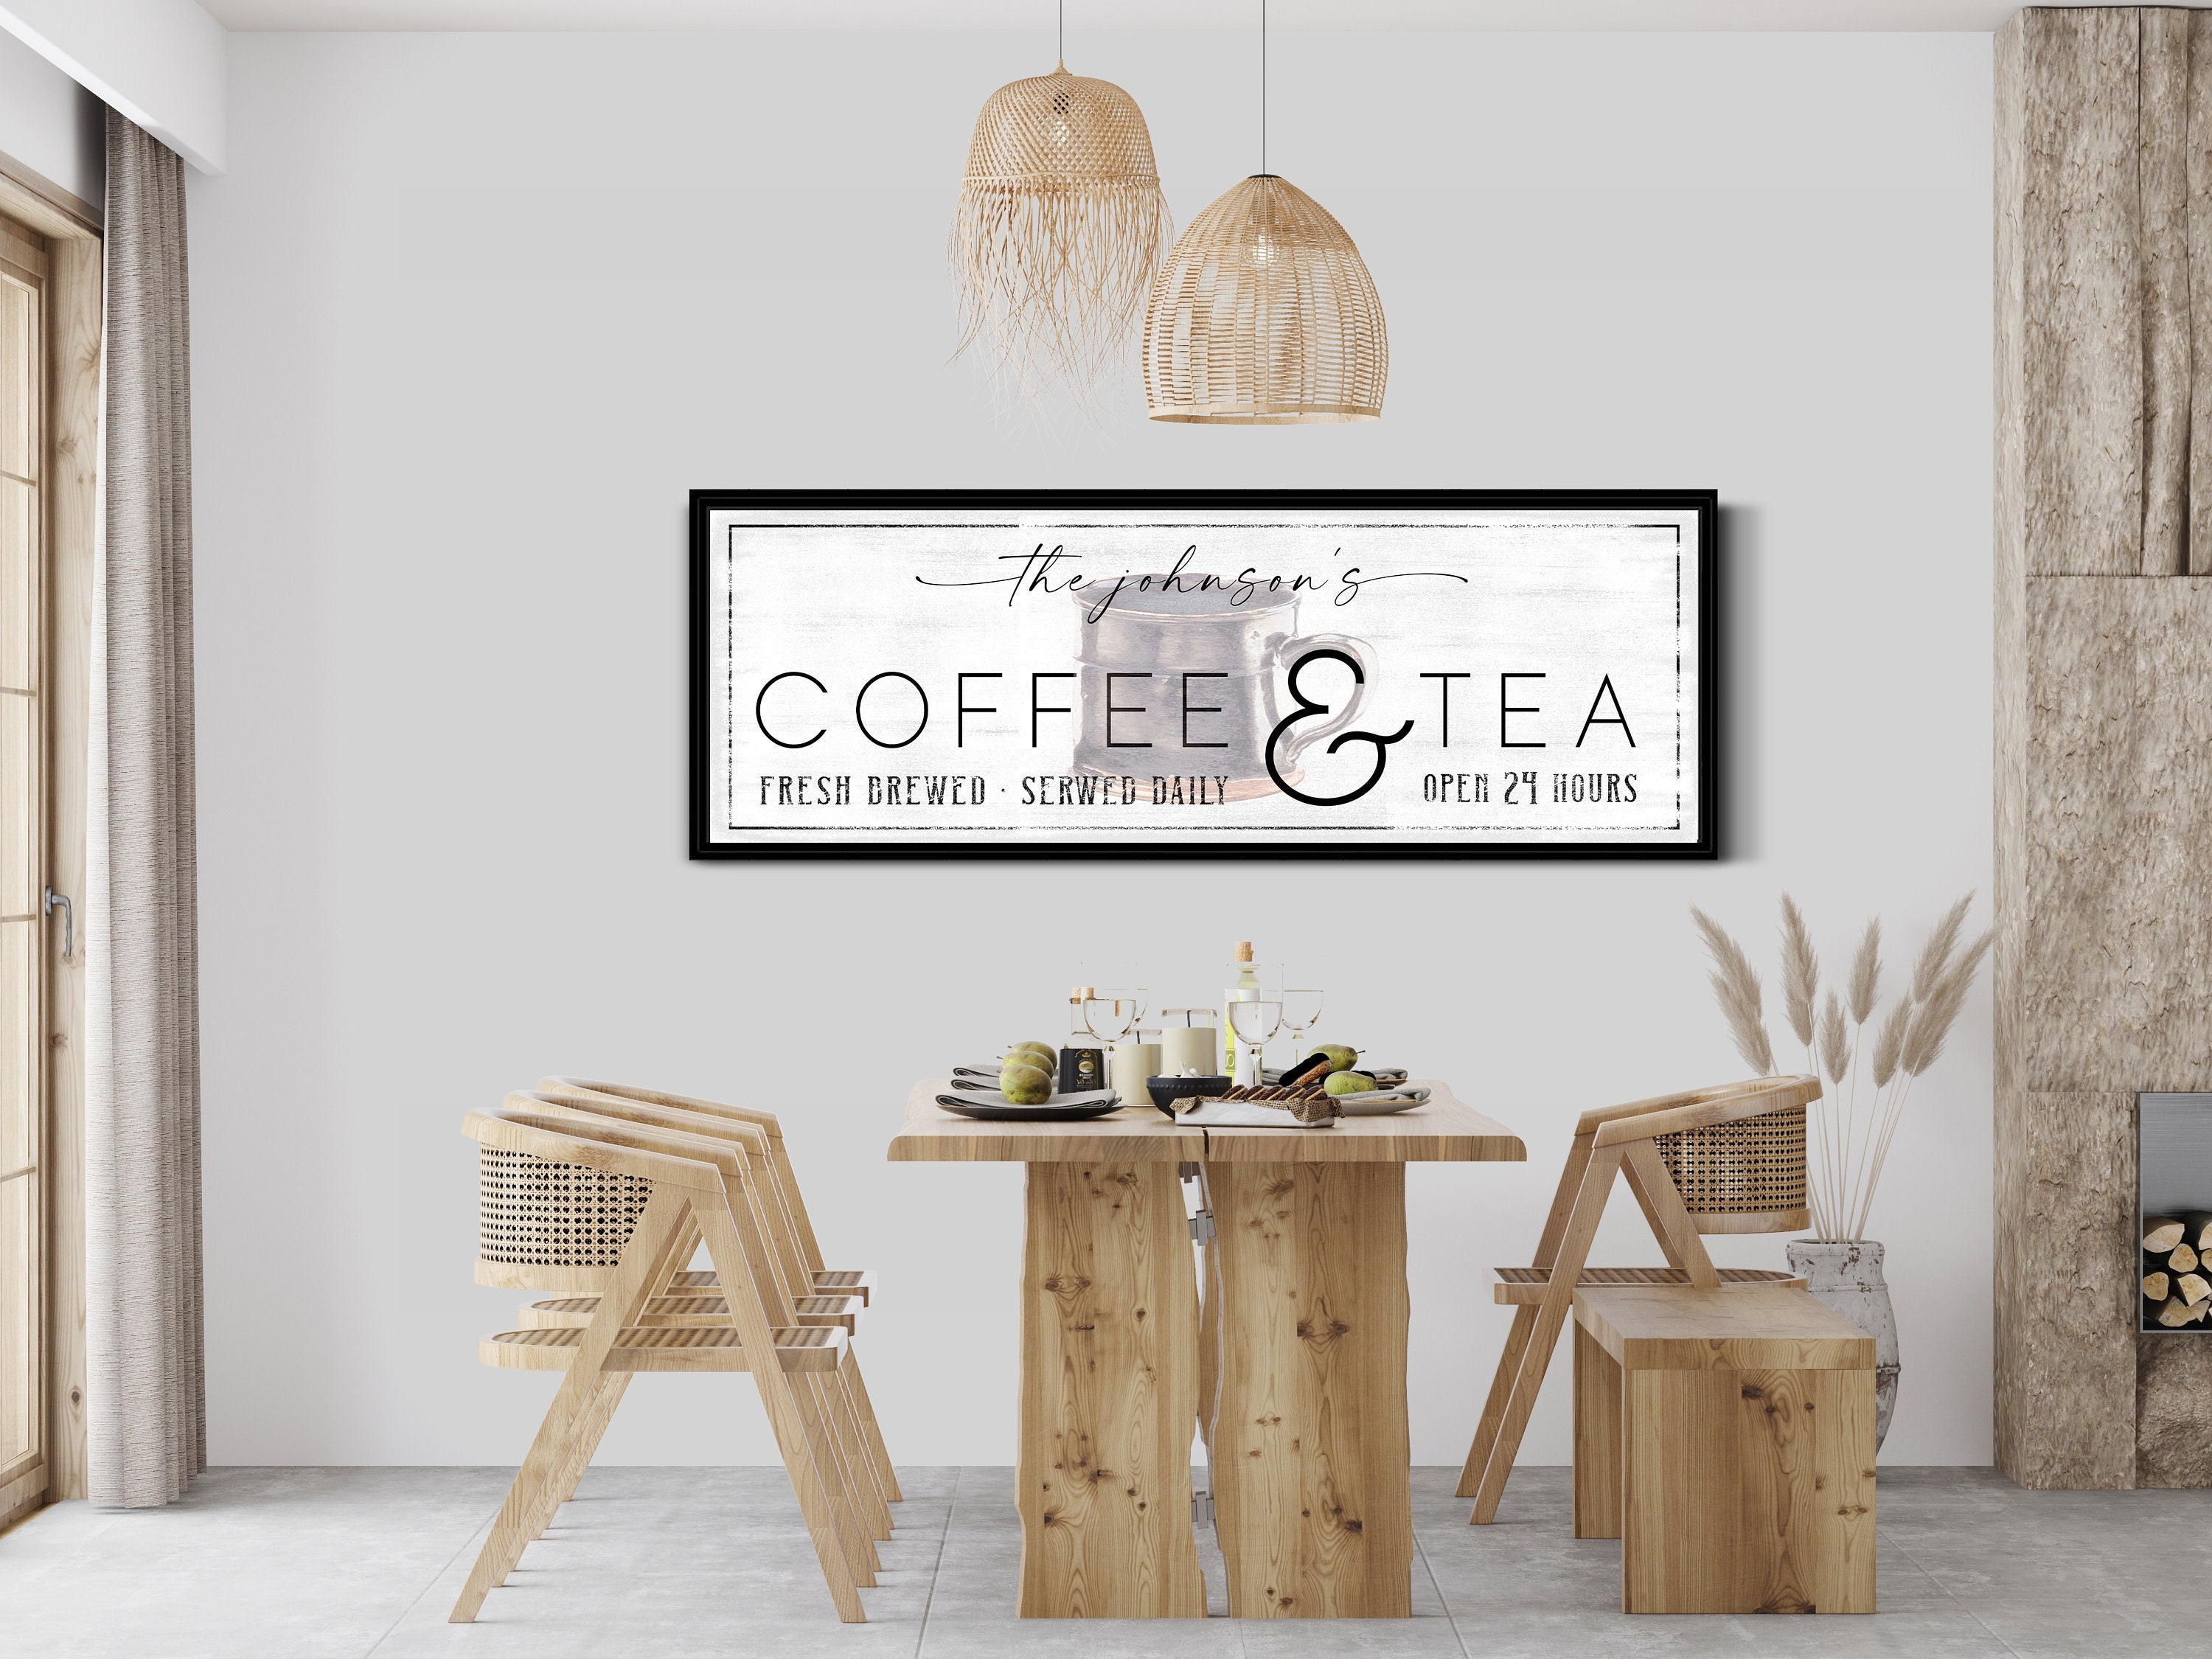 Coffee Bar Open Daily Cafe Decor Wood Hanging Plaque 5x10 Inch